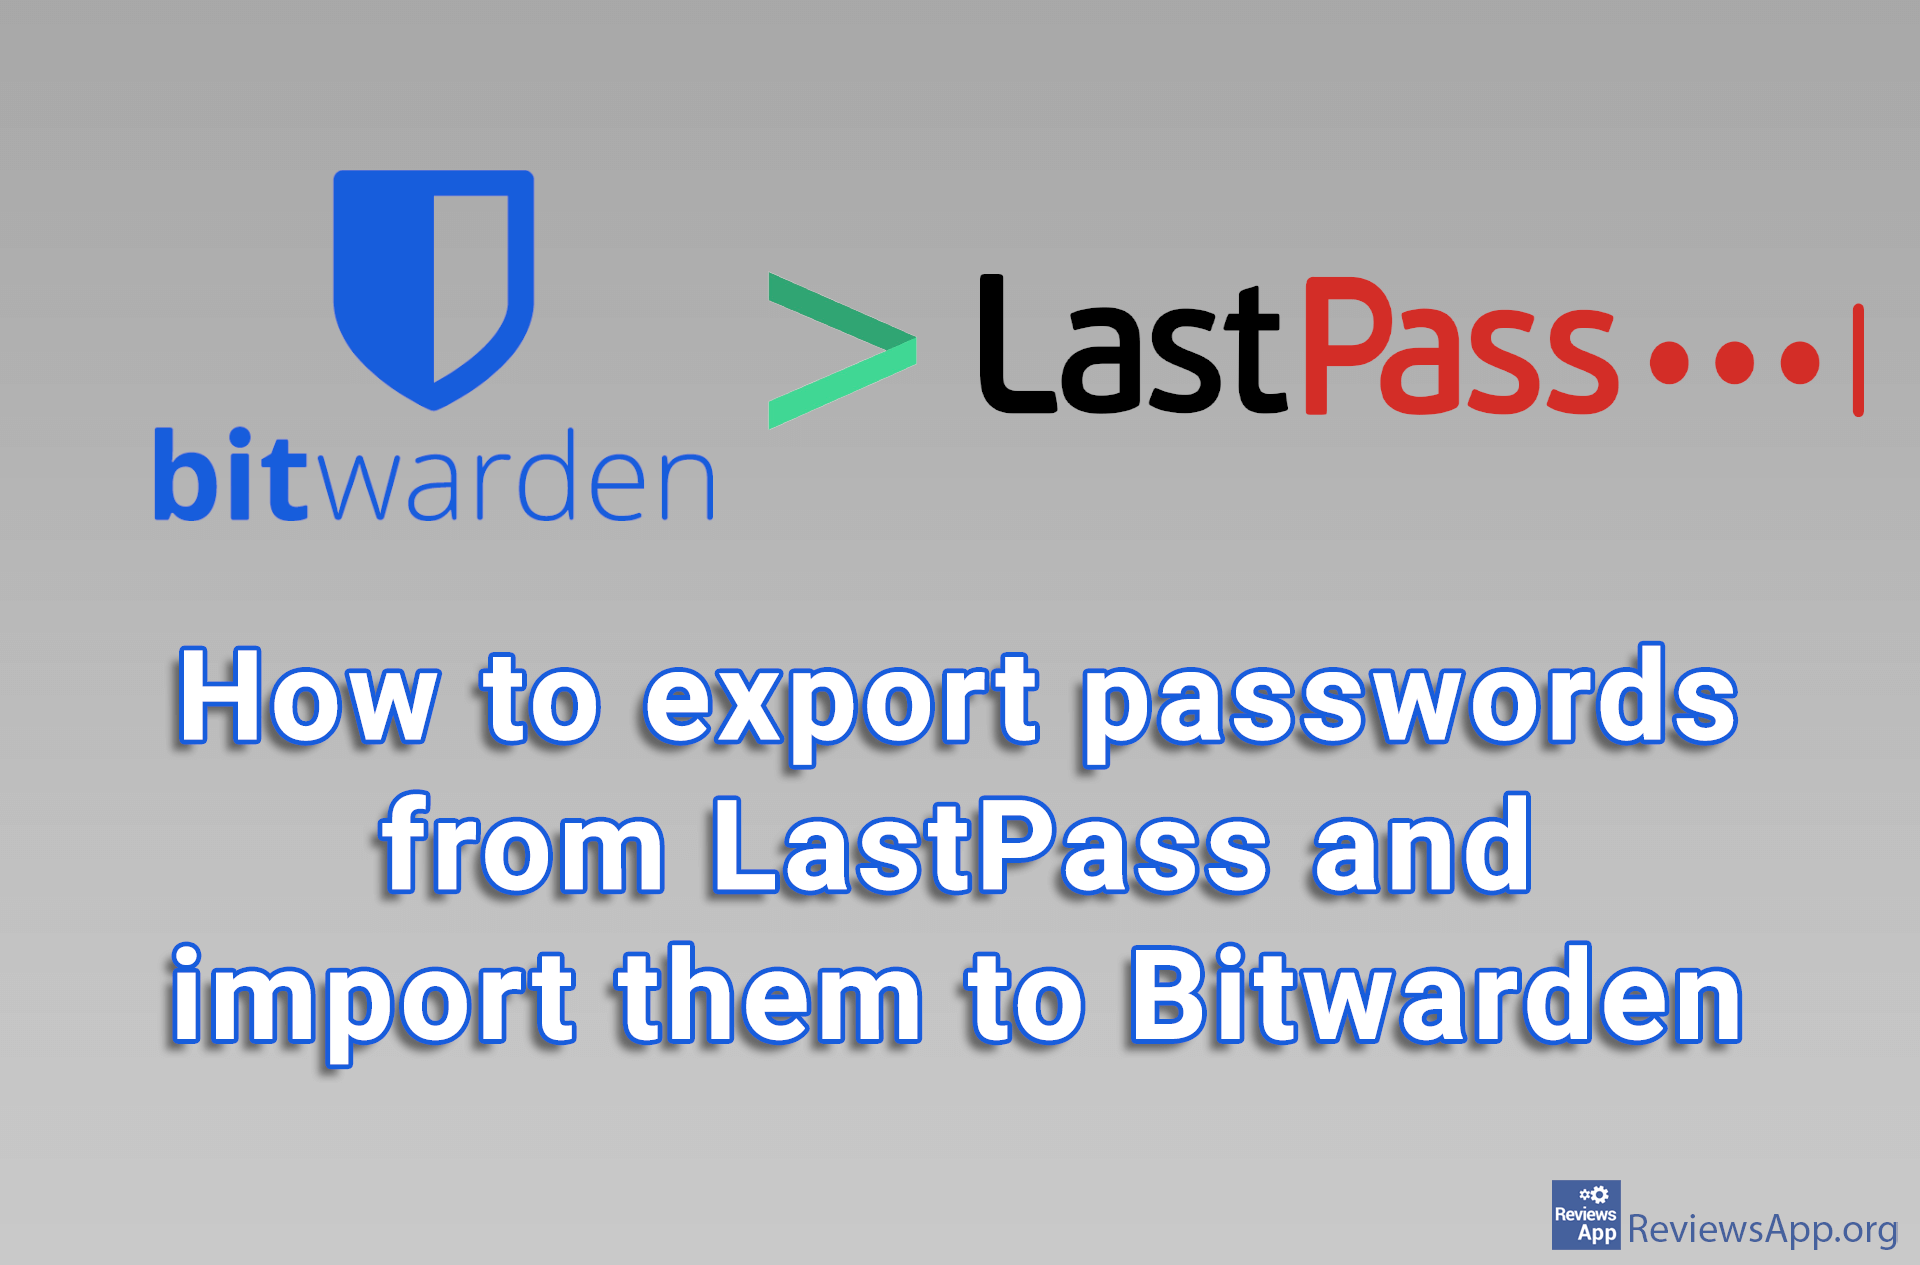 How to export passwords from LastPass and import them to Bitwarden